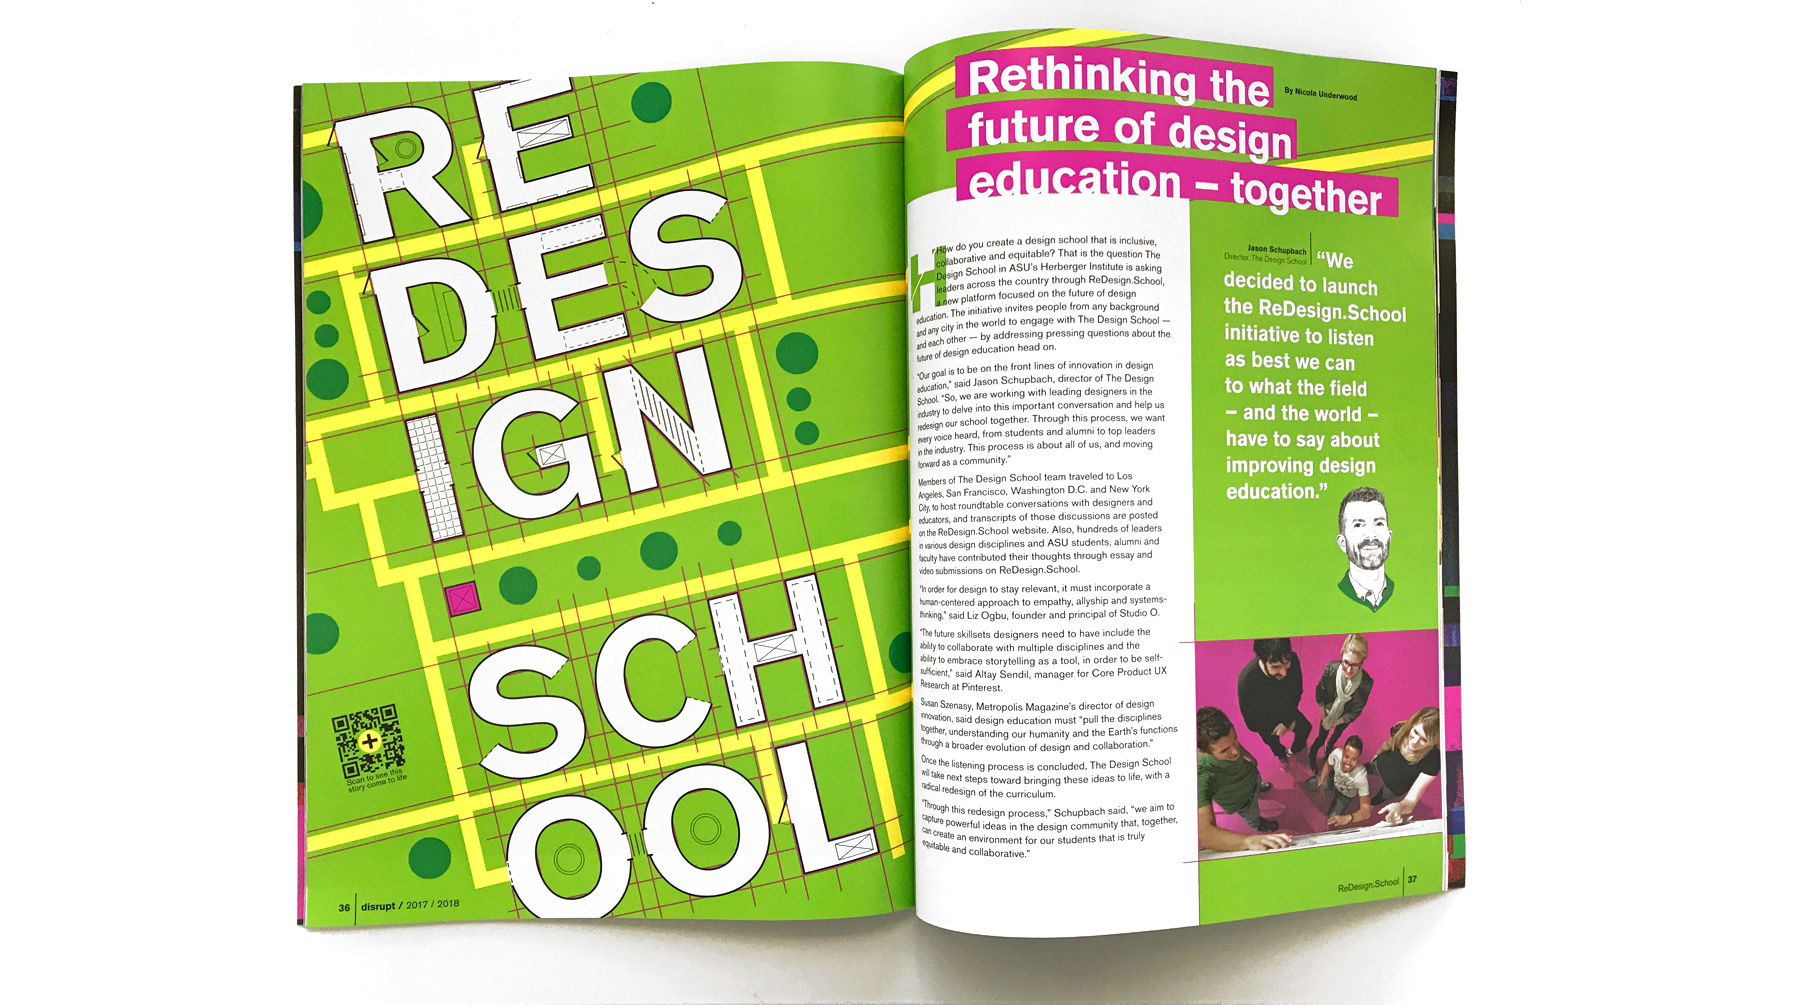 Magazine spread with custom type treatment in the style of architecture plans, with article text